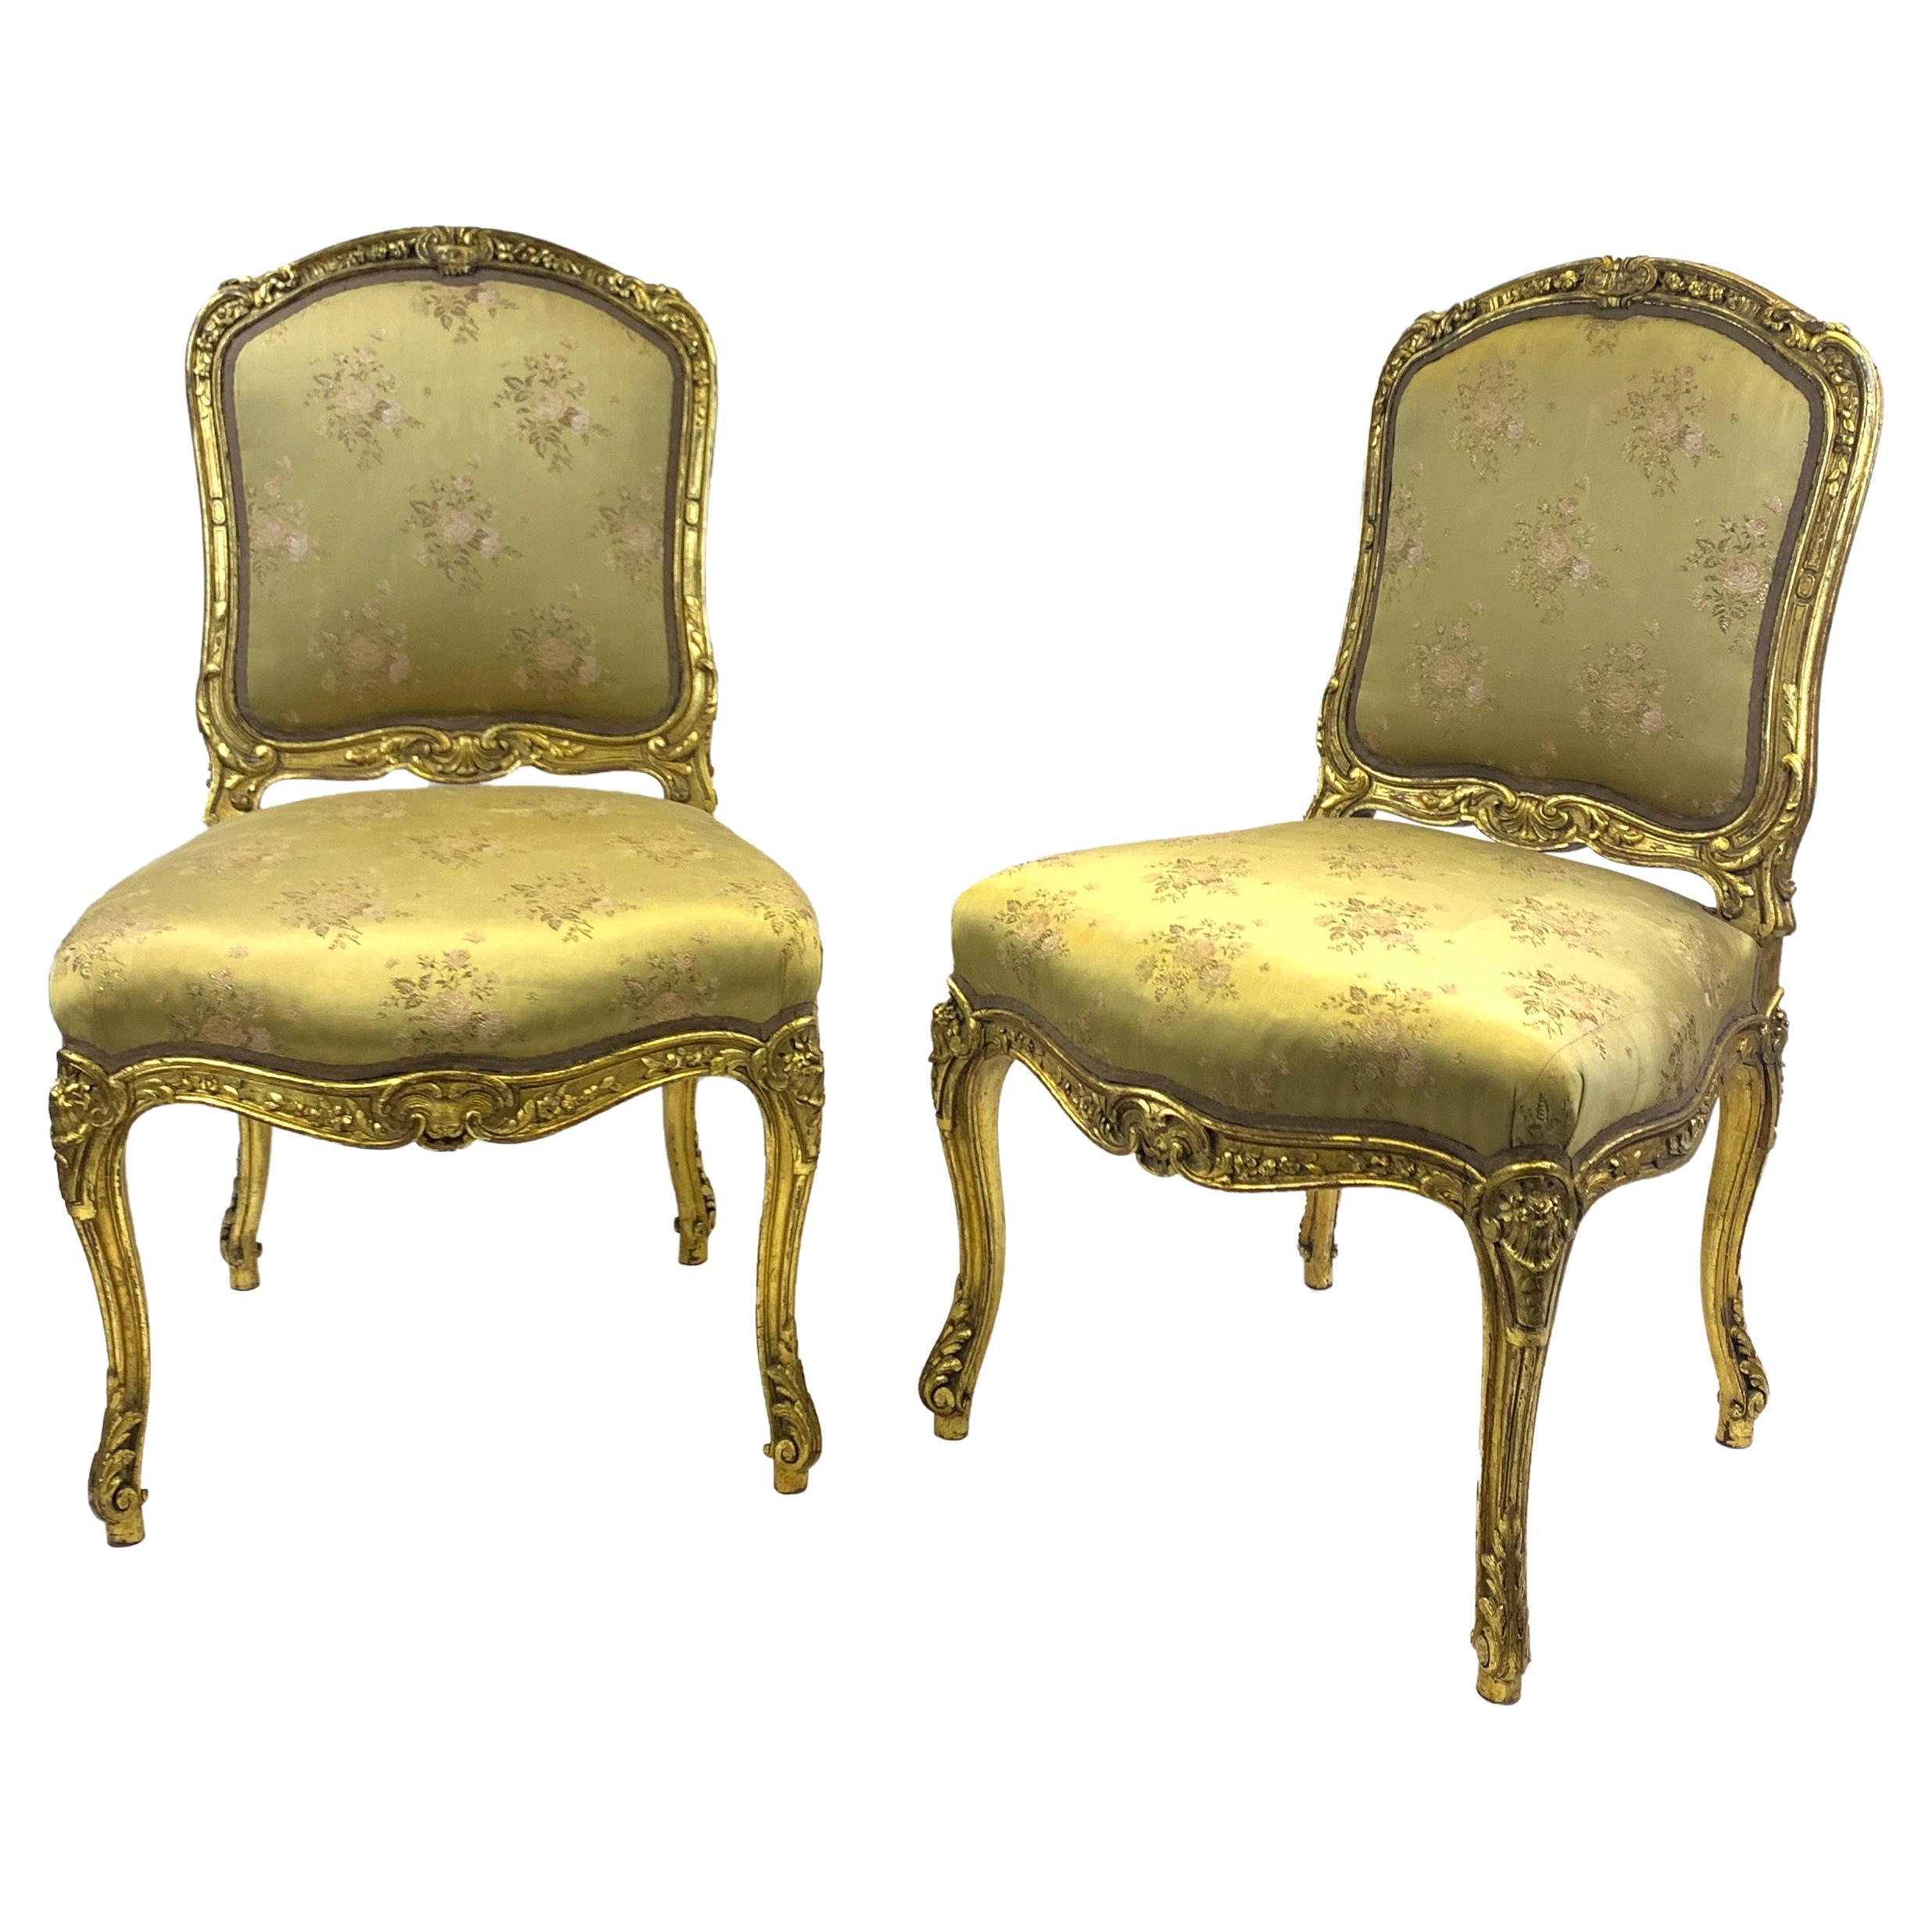 Pair of Rococo Style Gilt Wood Side Chairs, Late 19th Century For Sale